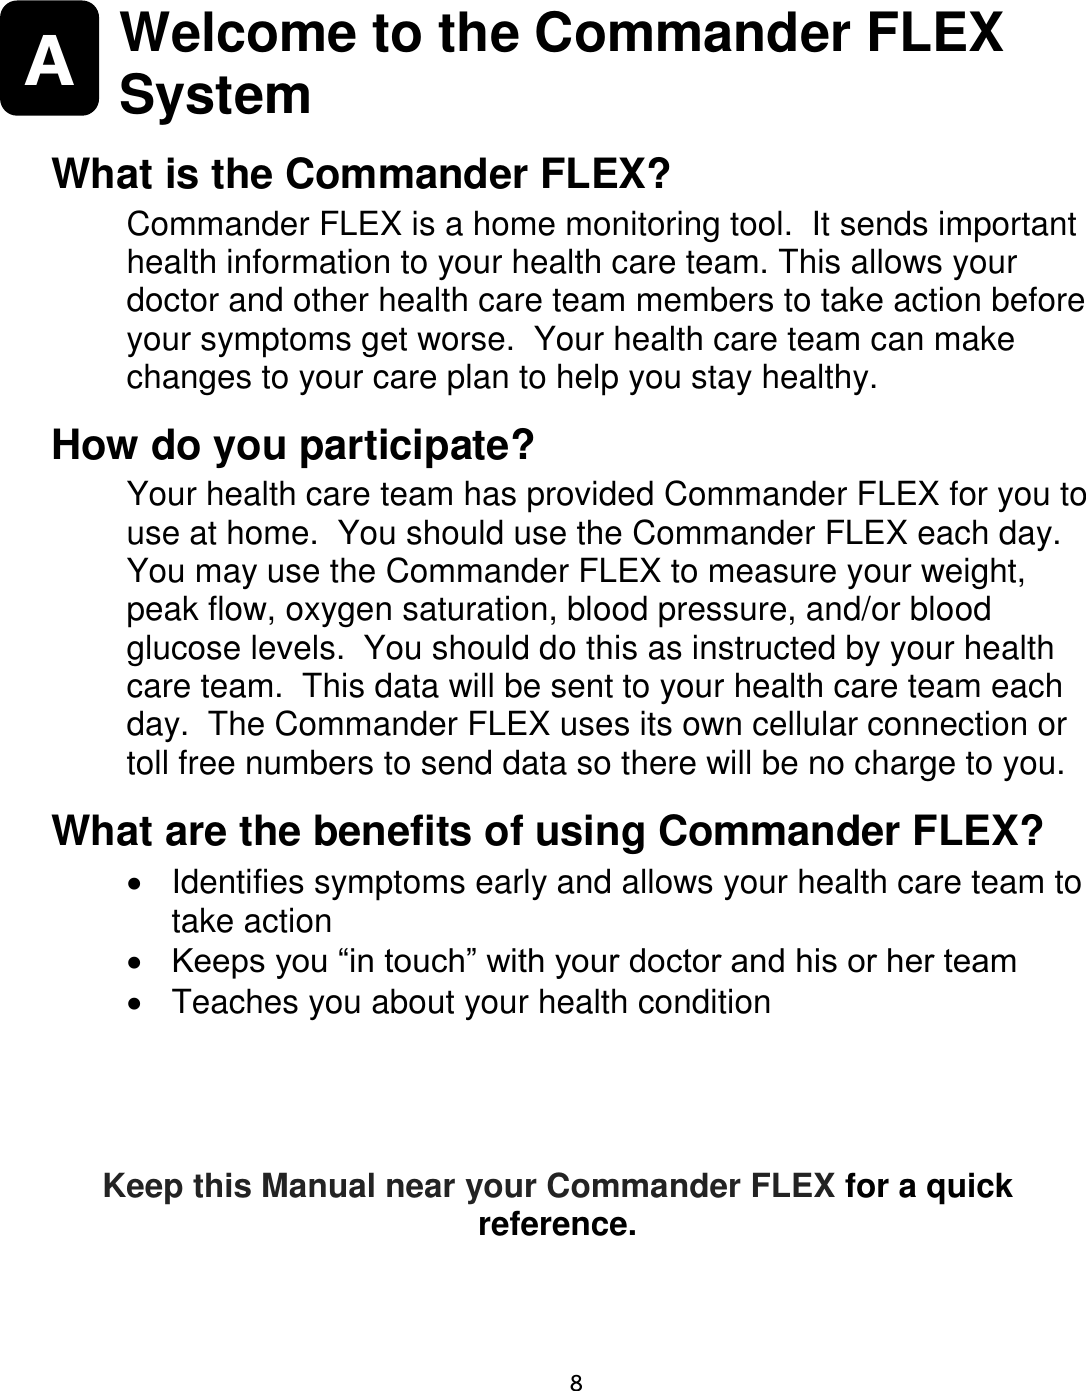     8  A  Welcome to the Commander FLEX System  What is the Commander FLEX? Commander FLEX is a home monitoring tool.  It sends important health information to your health care team. This allows your doctor and other health care team members to take action before your symptoms get worse.  Your health care team can make changes to your care plan to help you stay healthy. How do you participate? Your health care team has provided Commander FLEX for you to use at home.  You should use the Commander FLEX each day.  You may use the Commander FLEX to measure your weight, peak flow, oxygen saturation, blood pressure, and/or blood glucose levels.  You should do this as instructed by your health care team.  This data will be sent to your health care team each day.  The Commander FLEX uses its own cellular connection or toll free numbers to send data so there will be no charge to you. What are the benefits of using Commander FLEX?   Identifies symptoms early and allows your health care team to take action  Keeps you “in touch” with your doctor and his or her team   Teaches you about your health condition  Keep this Manual near your Commander FLEX for a quick reference.  